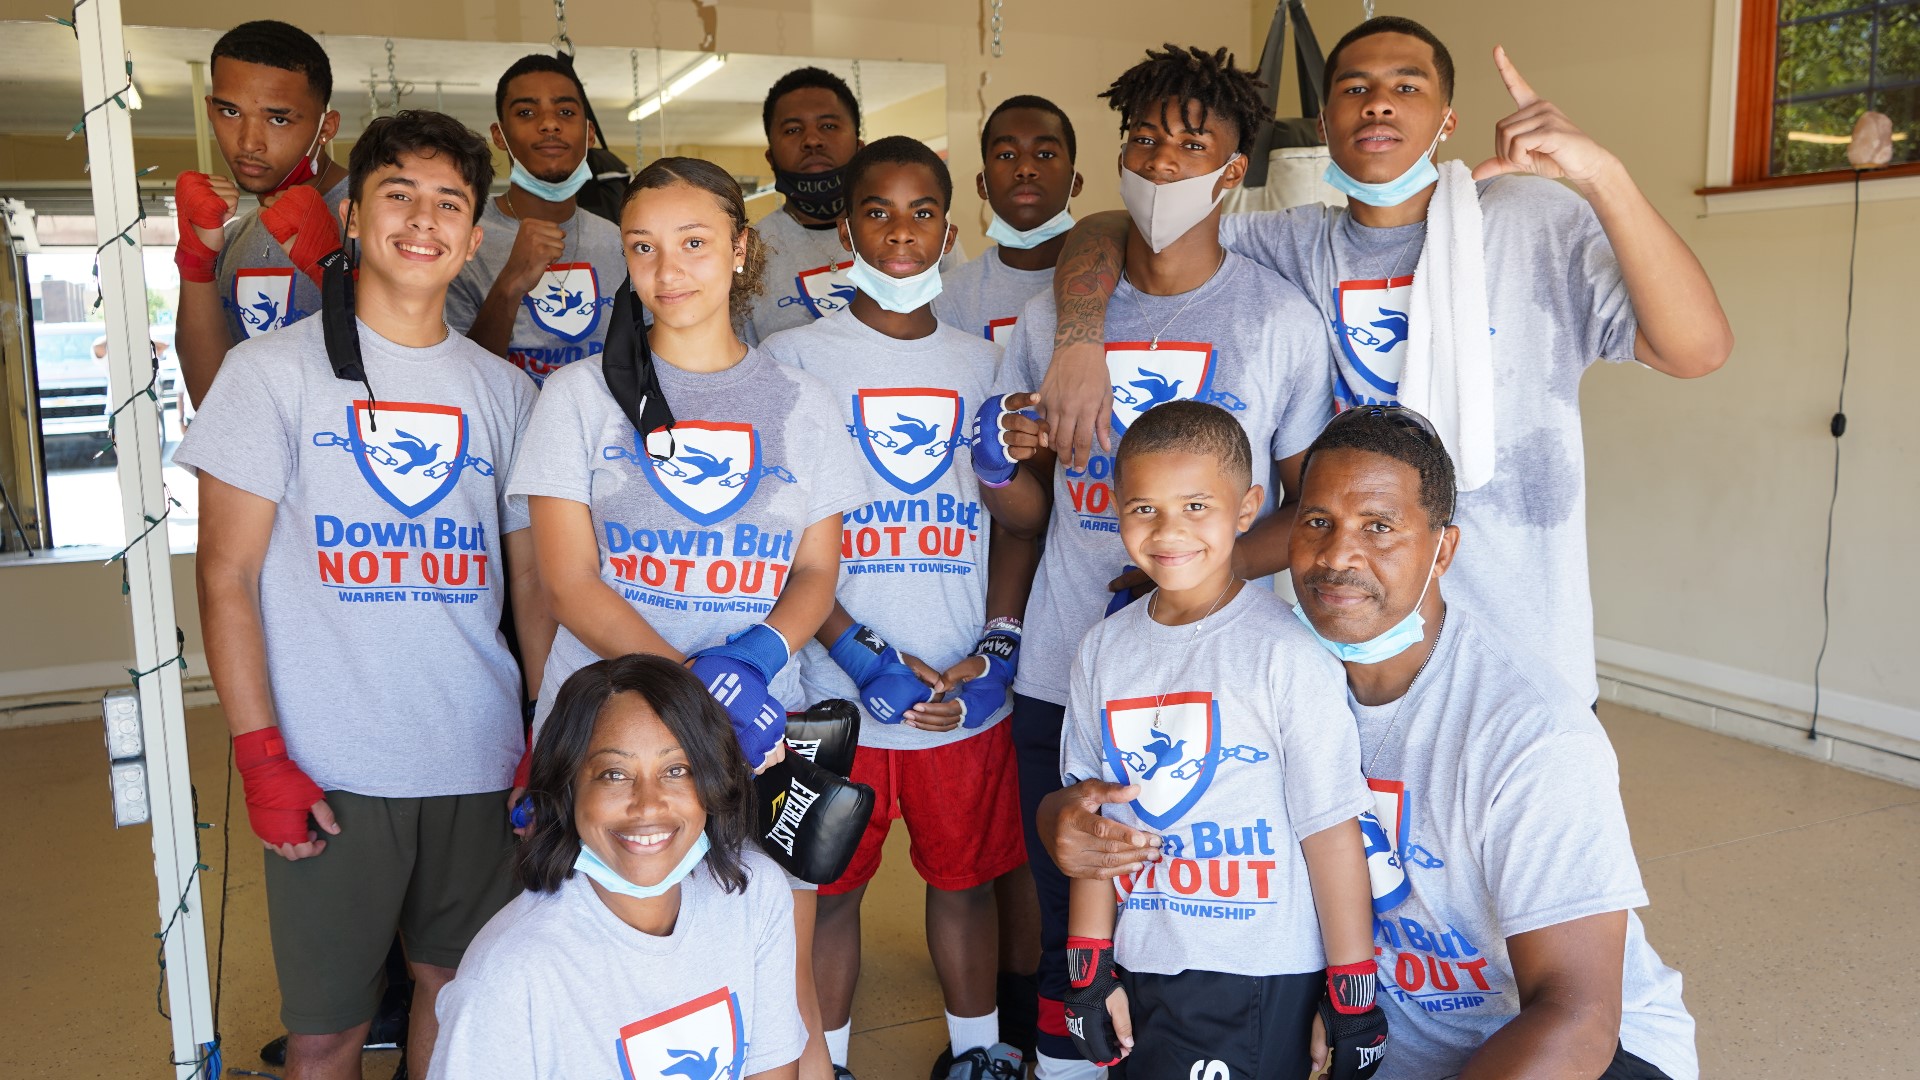 Alphonso Bailey realized in prison that he needed to turn his life around and is now helping the students he teaches boxing to make better choices.